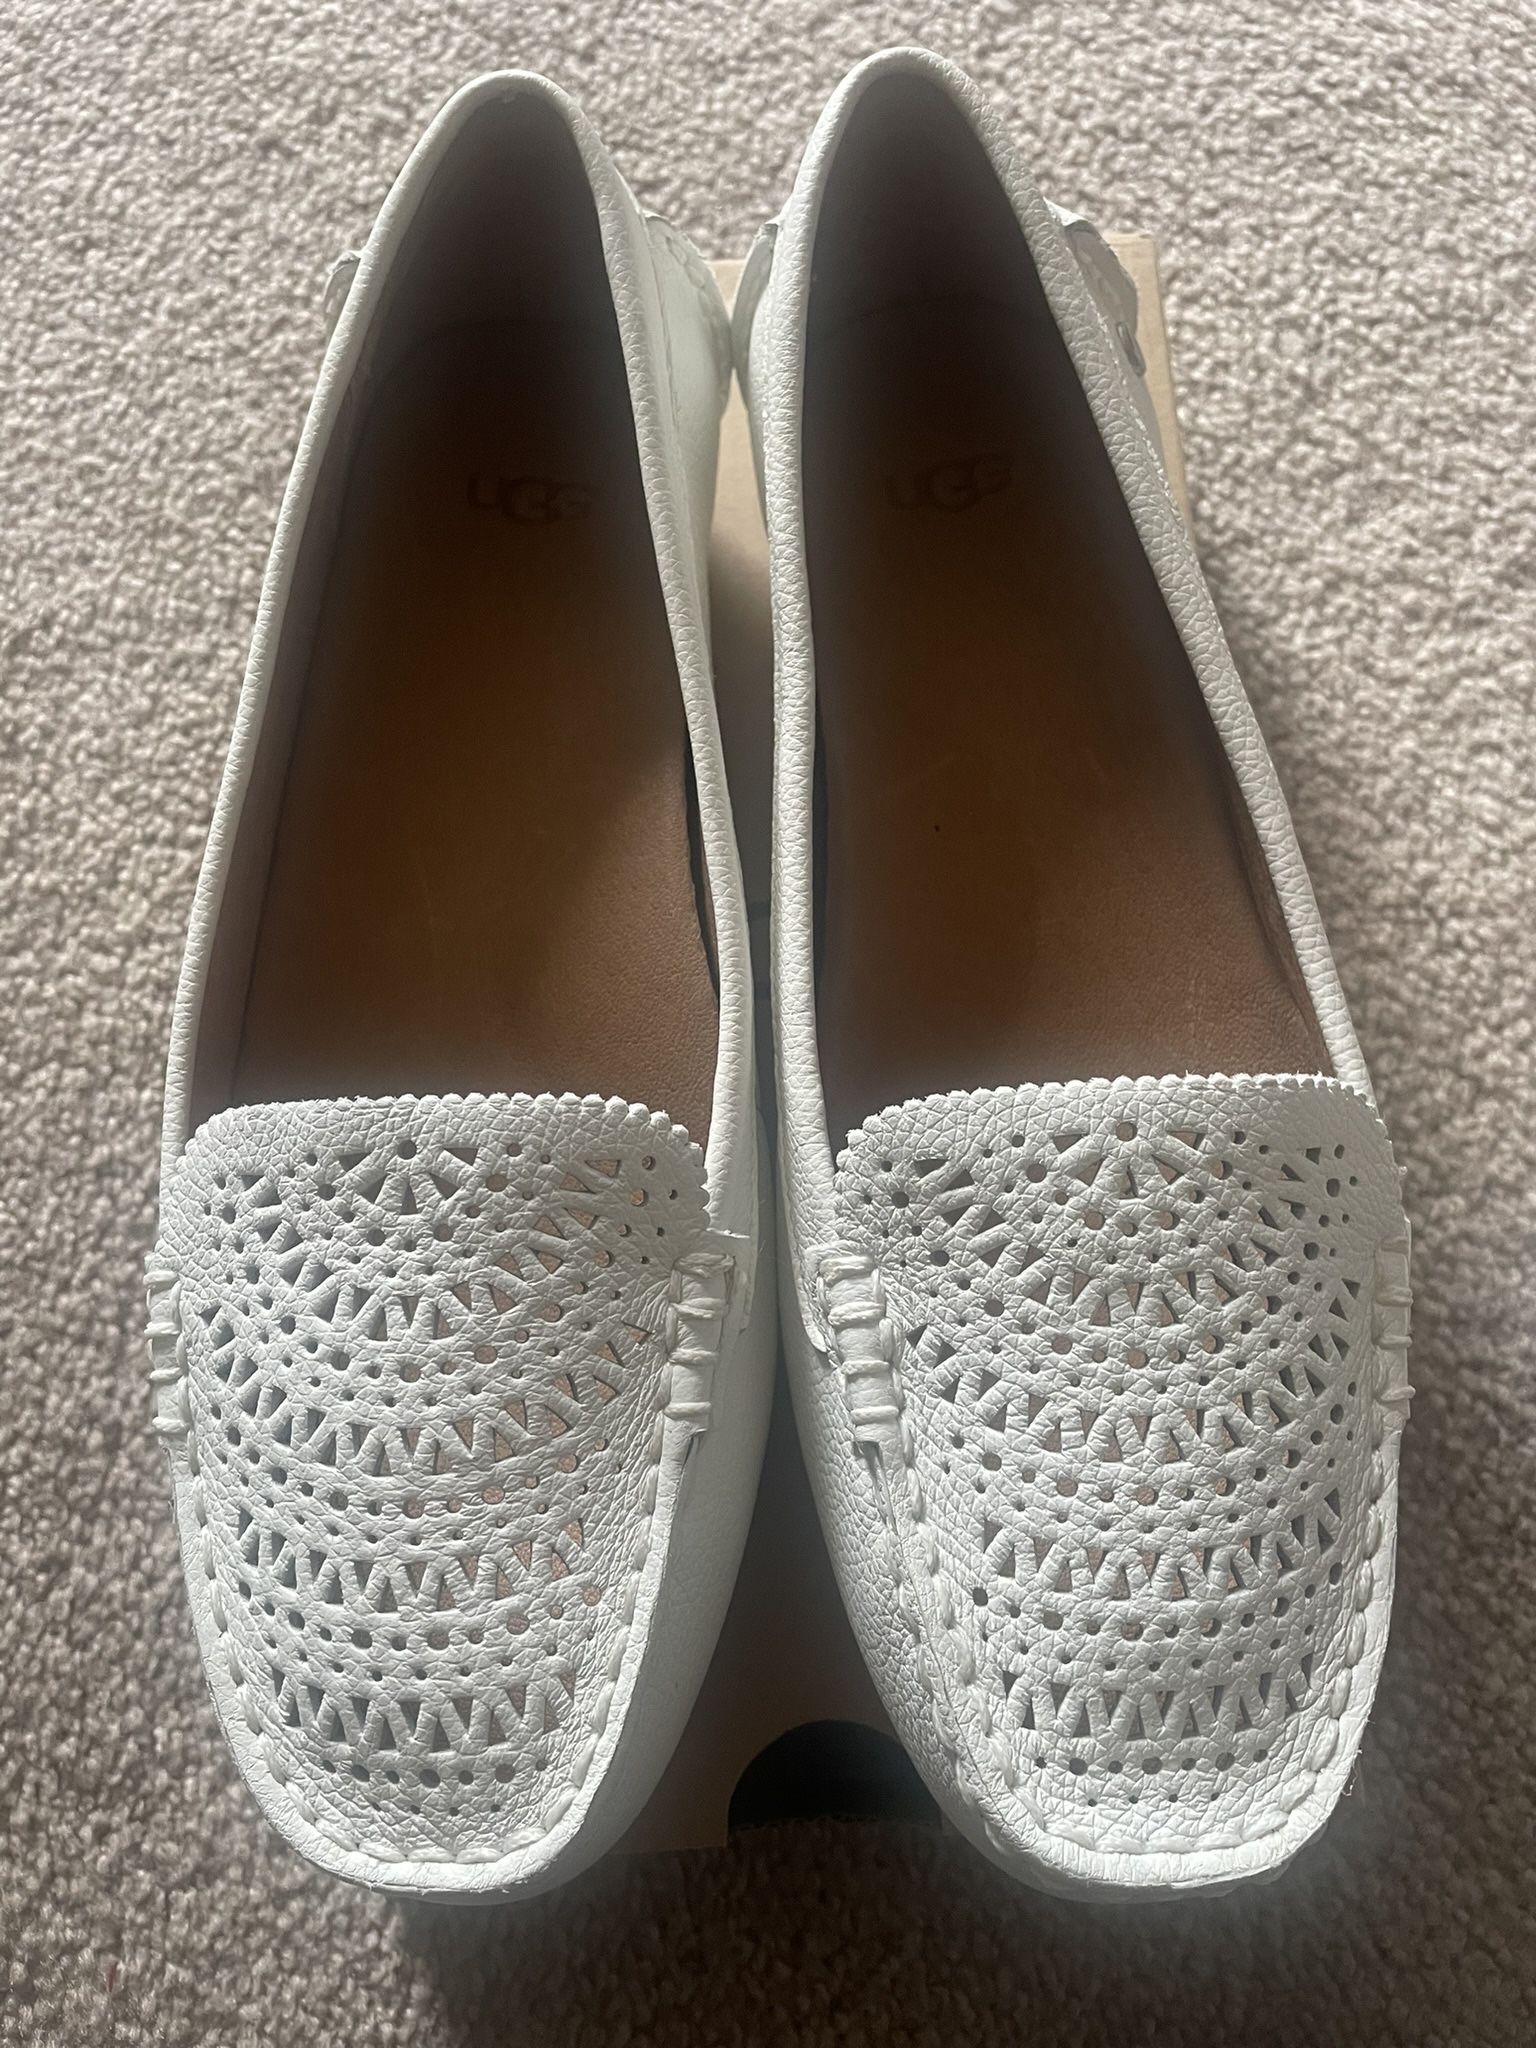 New UGG White Clair Perforated Slip on Leather Loafers Size 7.5